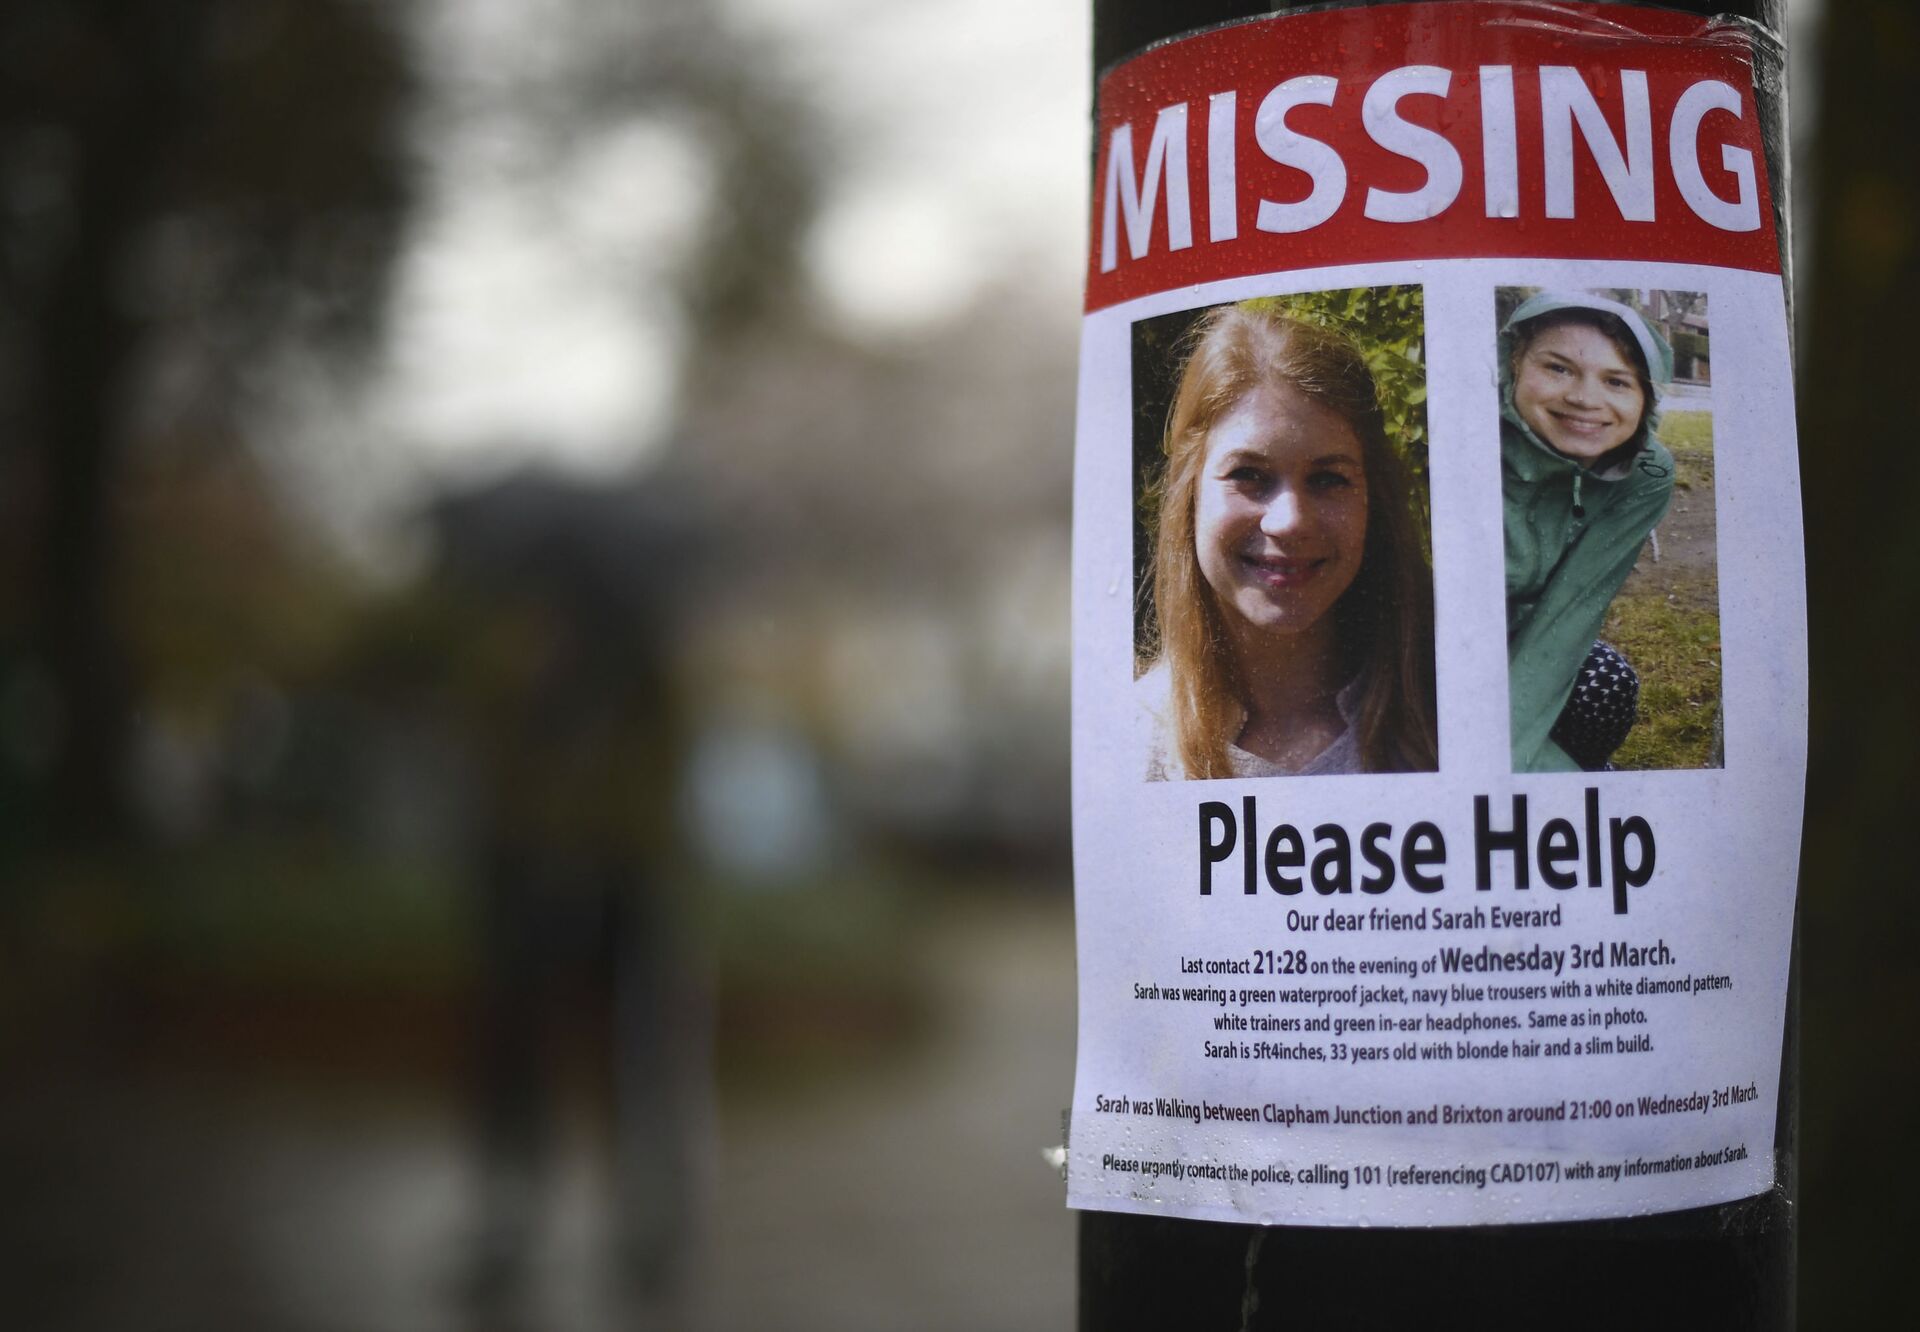 A missing sign outside Poynders Court on the A205 in Clapham, London Wednesday March 10, 2021 during the continuing search for Sarah Everard who has been missing for a week - Sputnik International, 1920, 07.09.2021